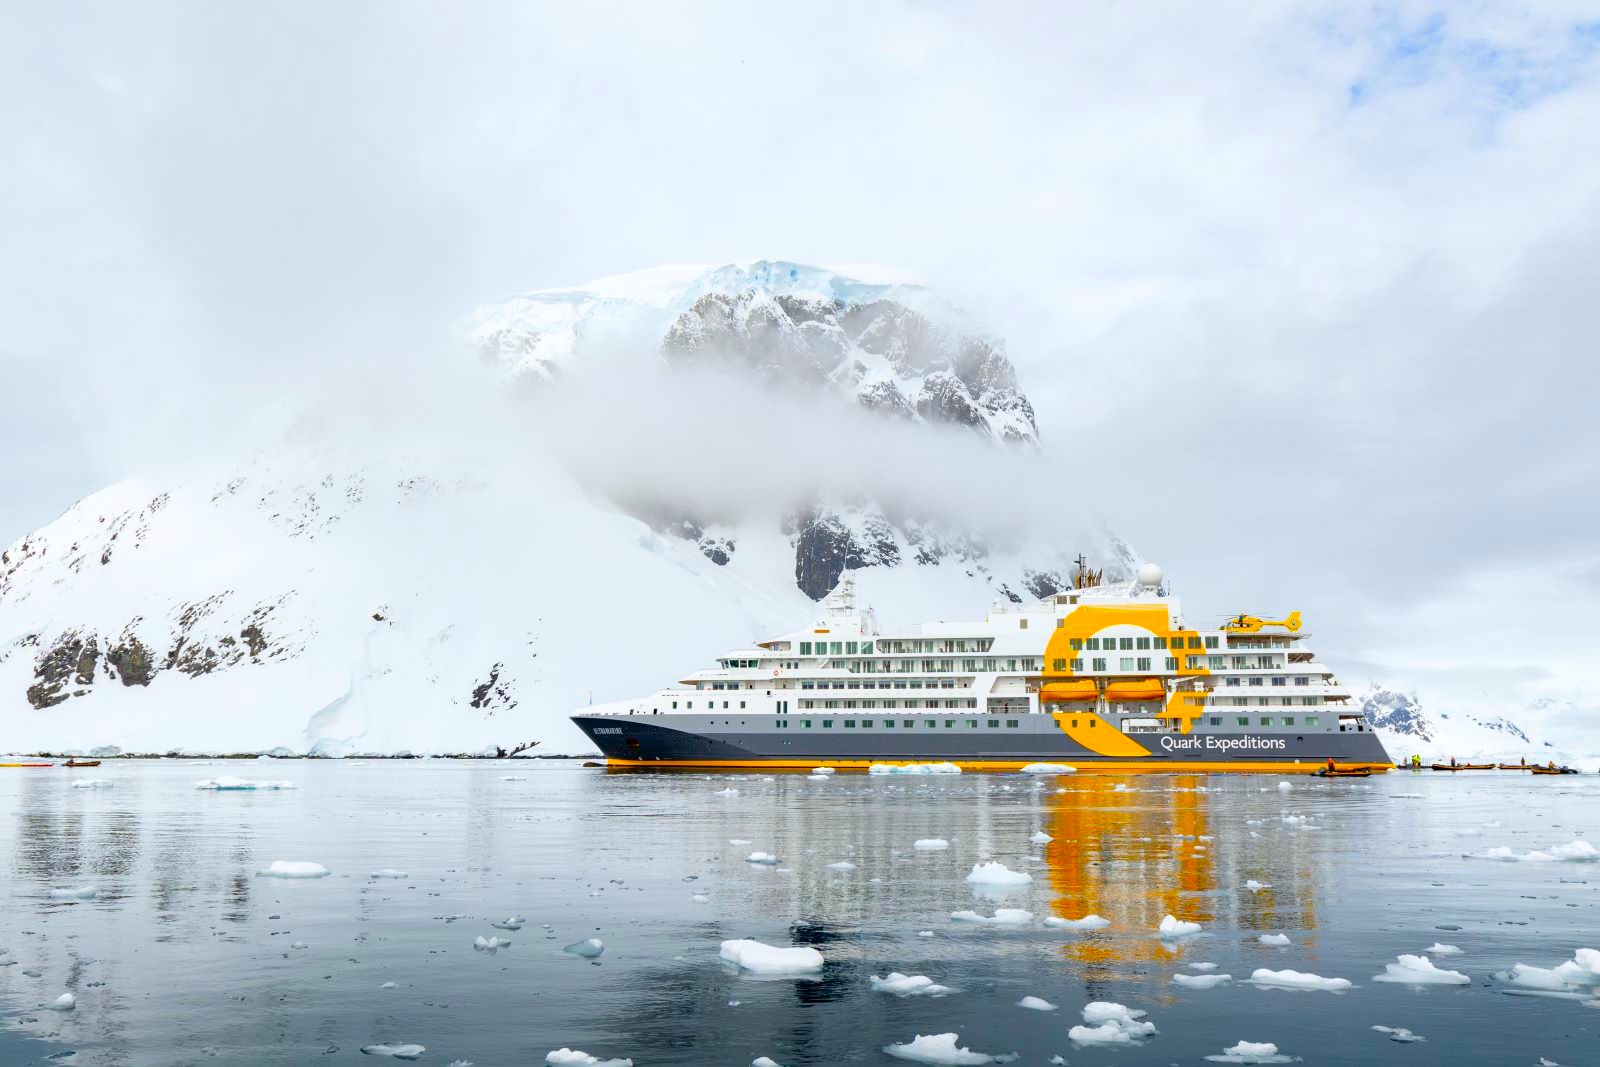 Exterior view of Quark Expeditions' Ultramarine cruise ship in the Arctic